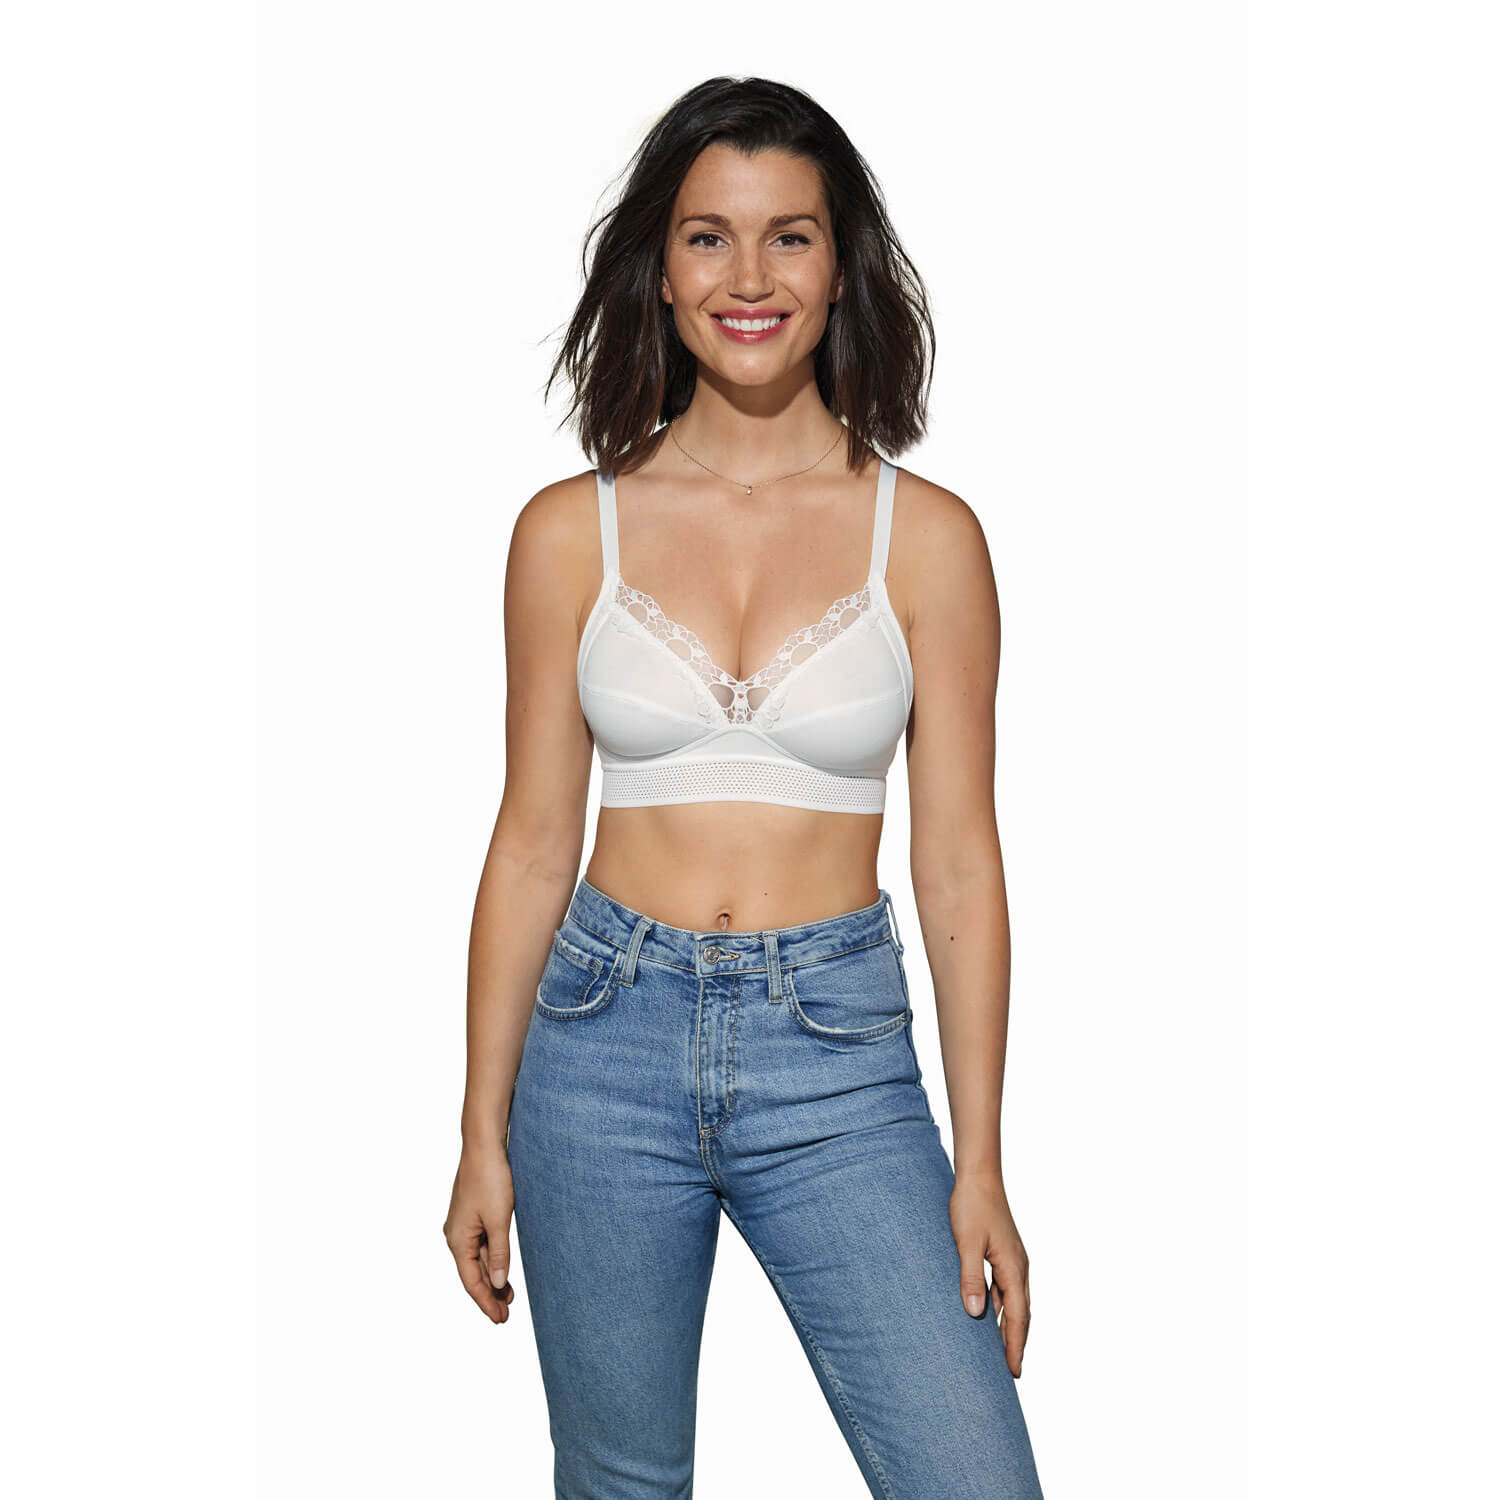 Feel Good Support - Support bra